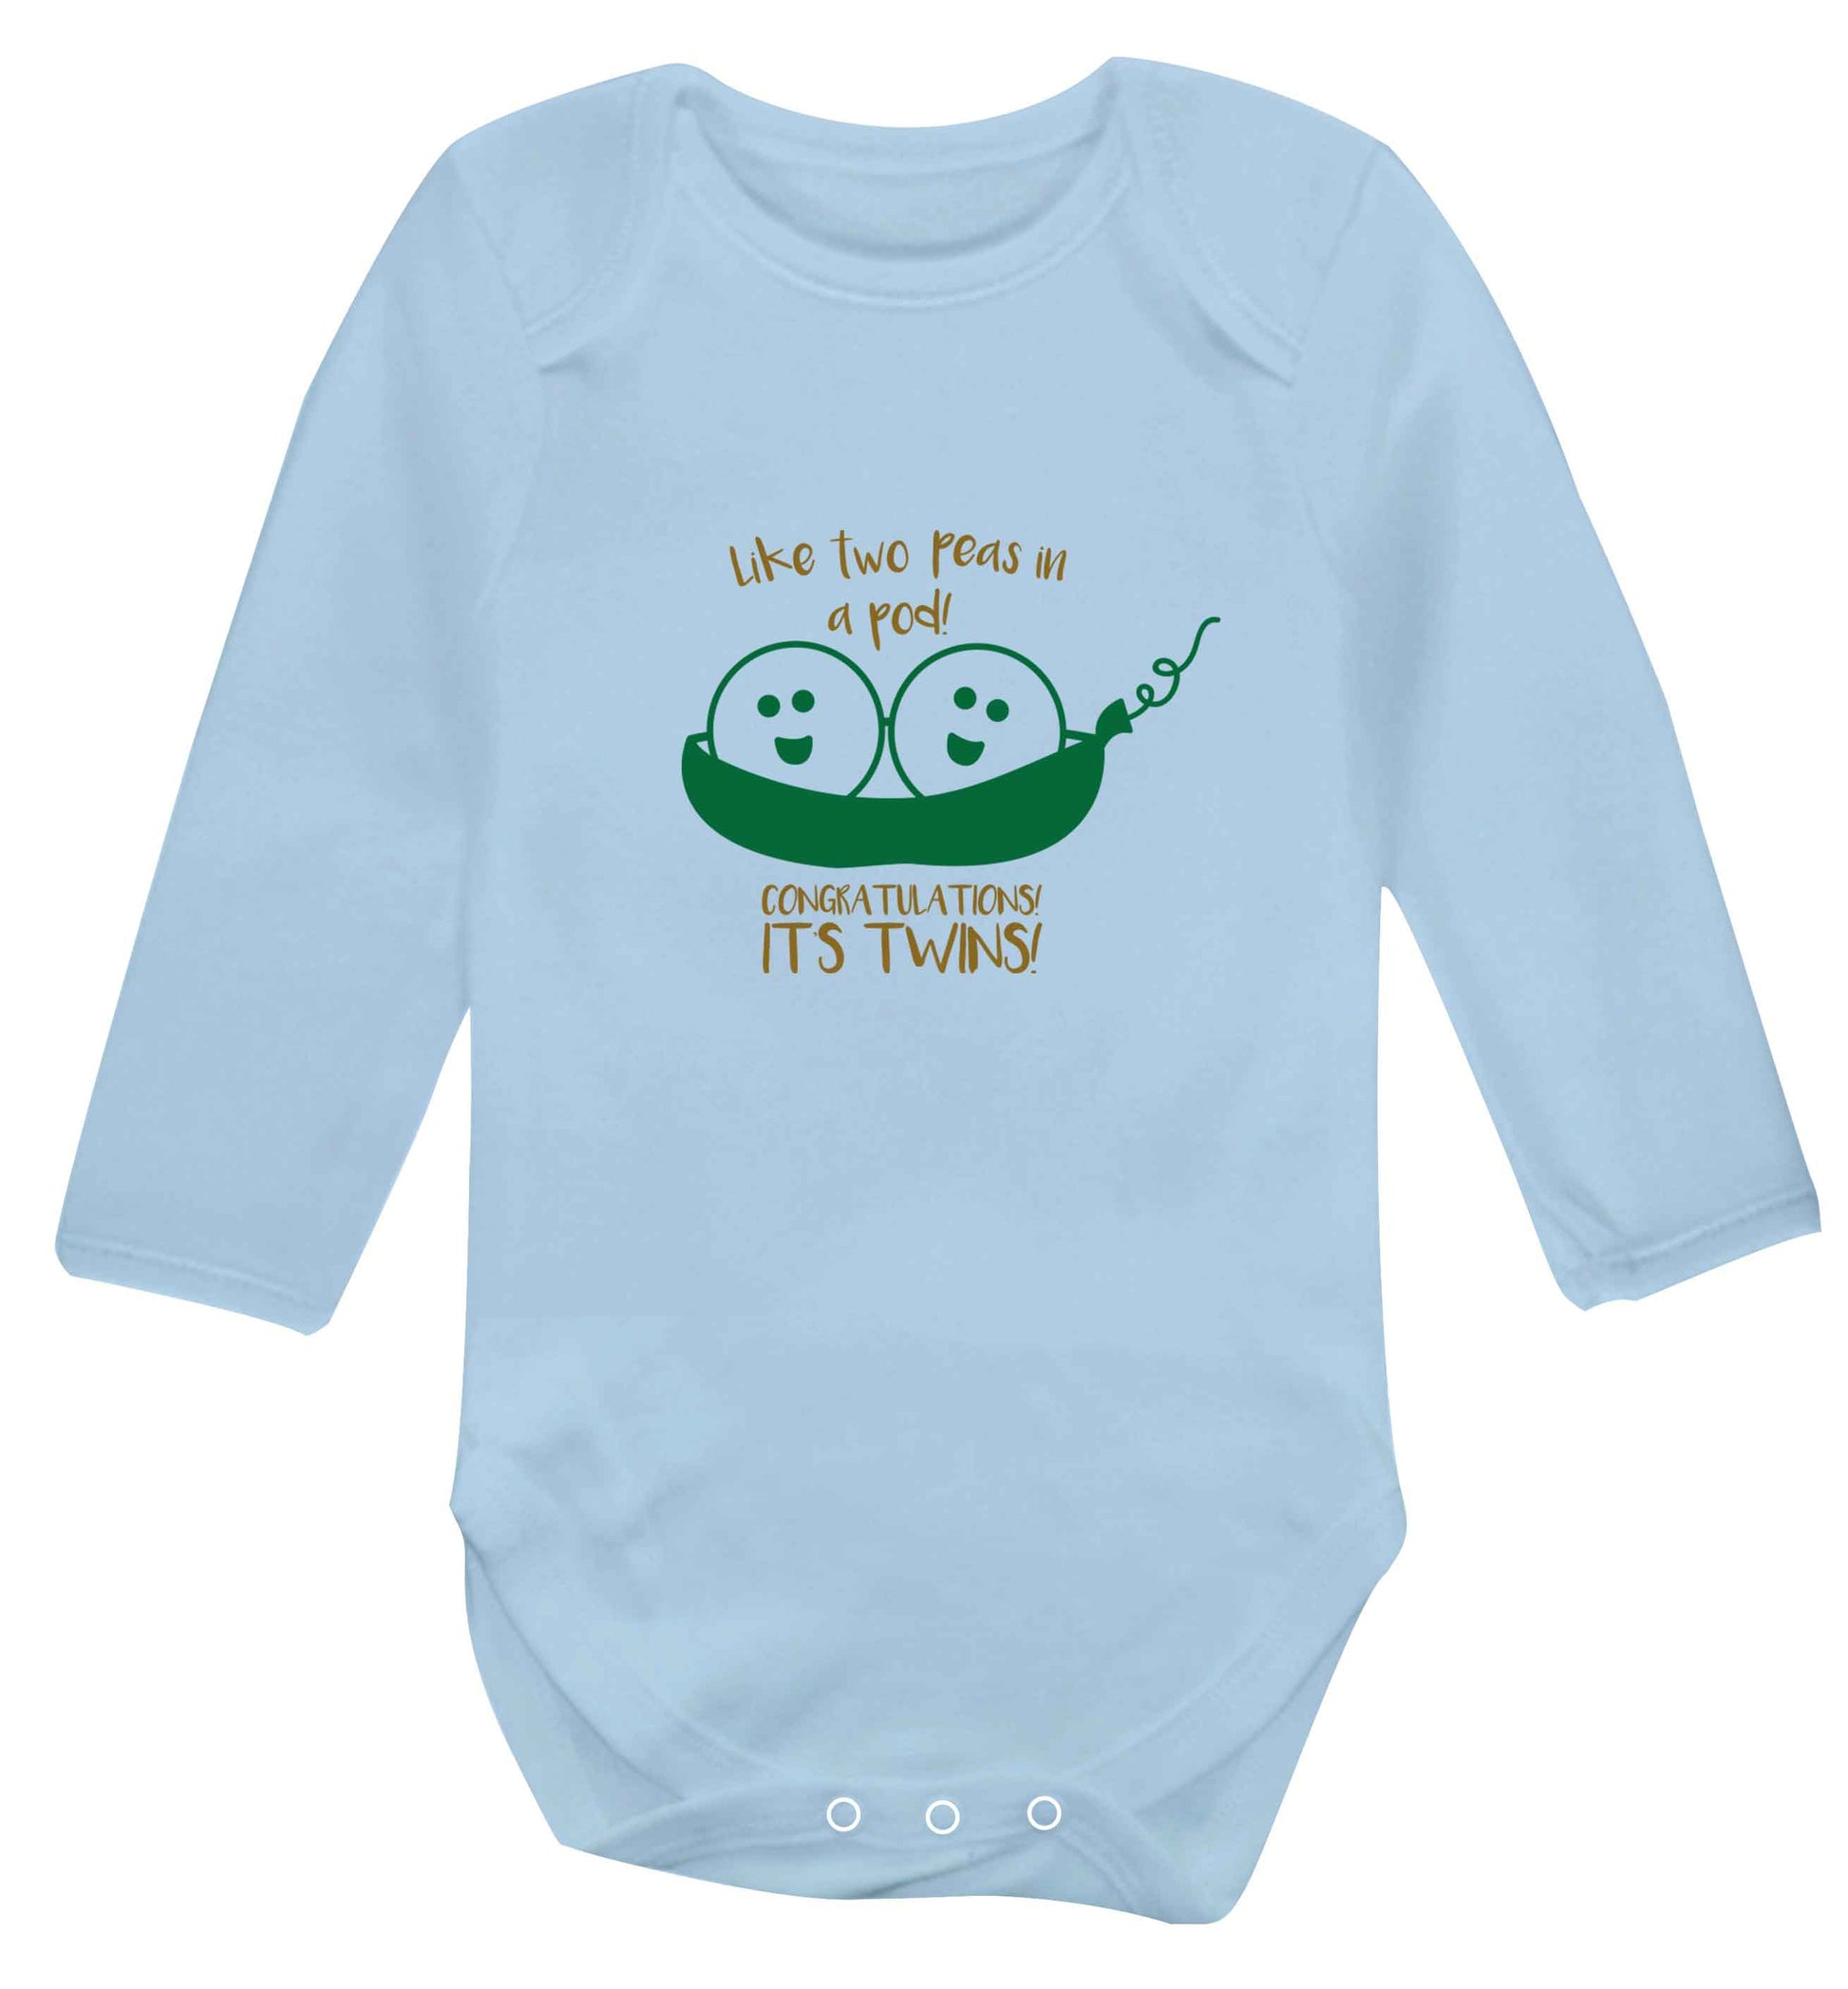 Like two peas in a pod! Congratulations it's twins! baby vest long sleeved pale blue 6-12 months